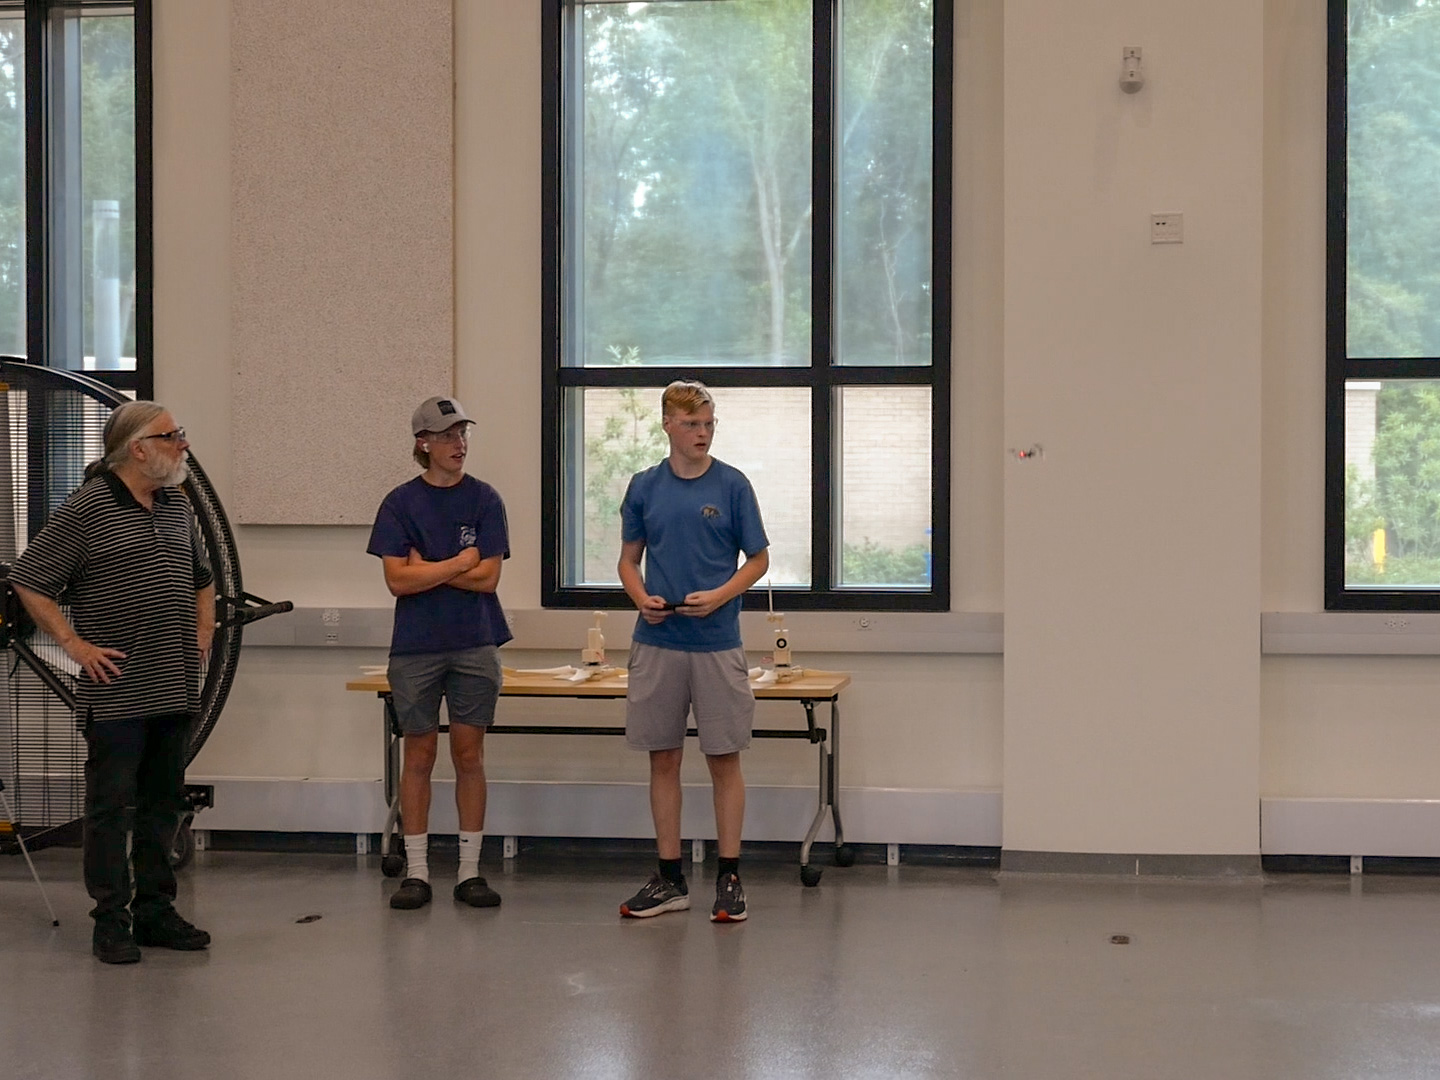 Camp instructor and two camp participants fly small drone inside lab space